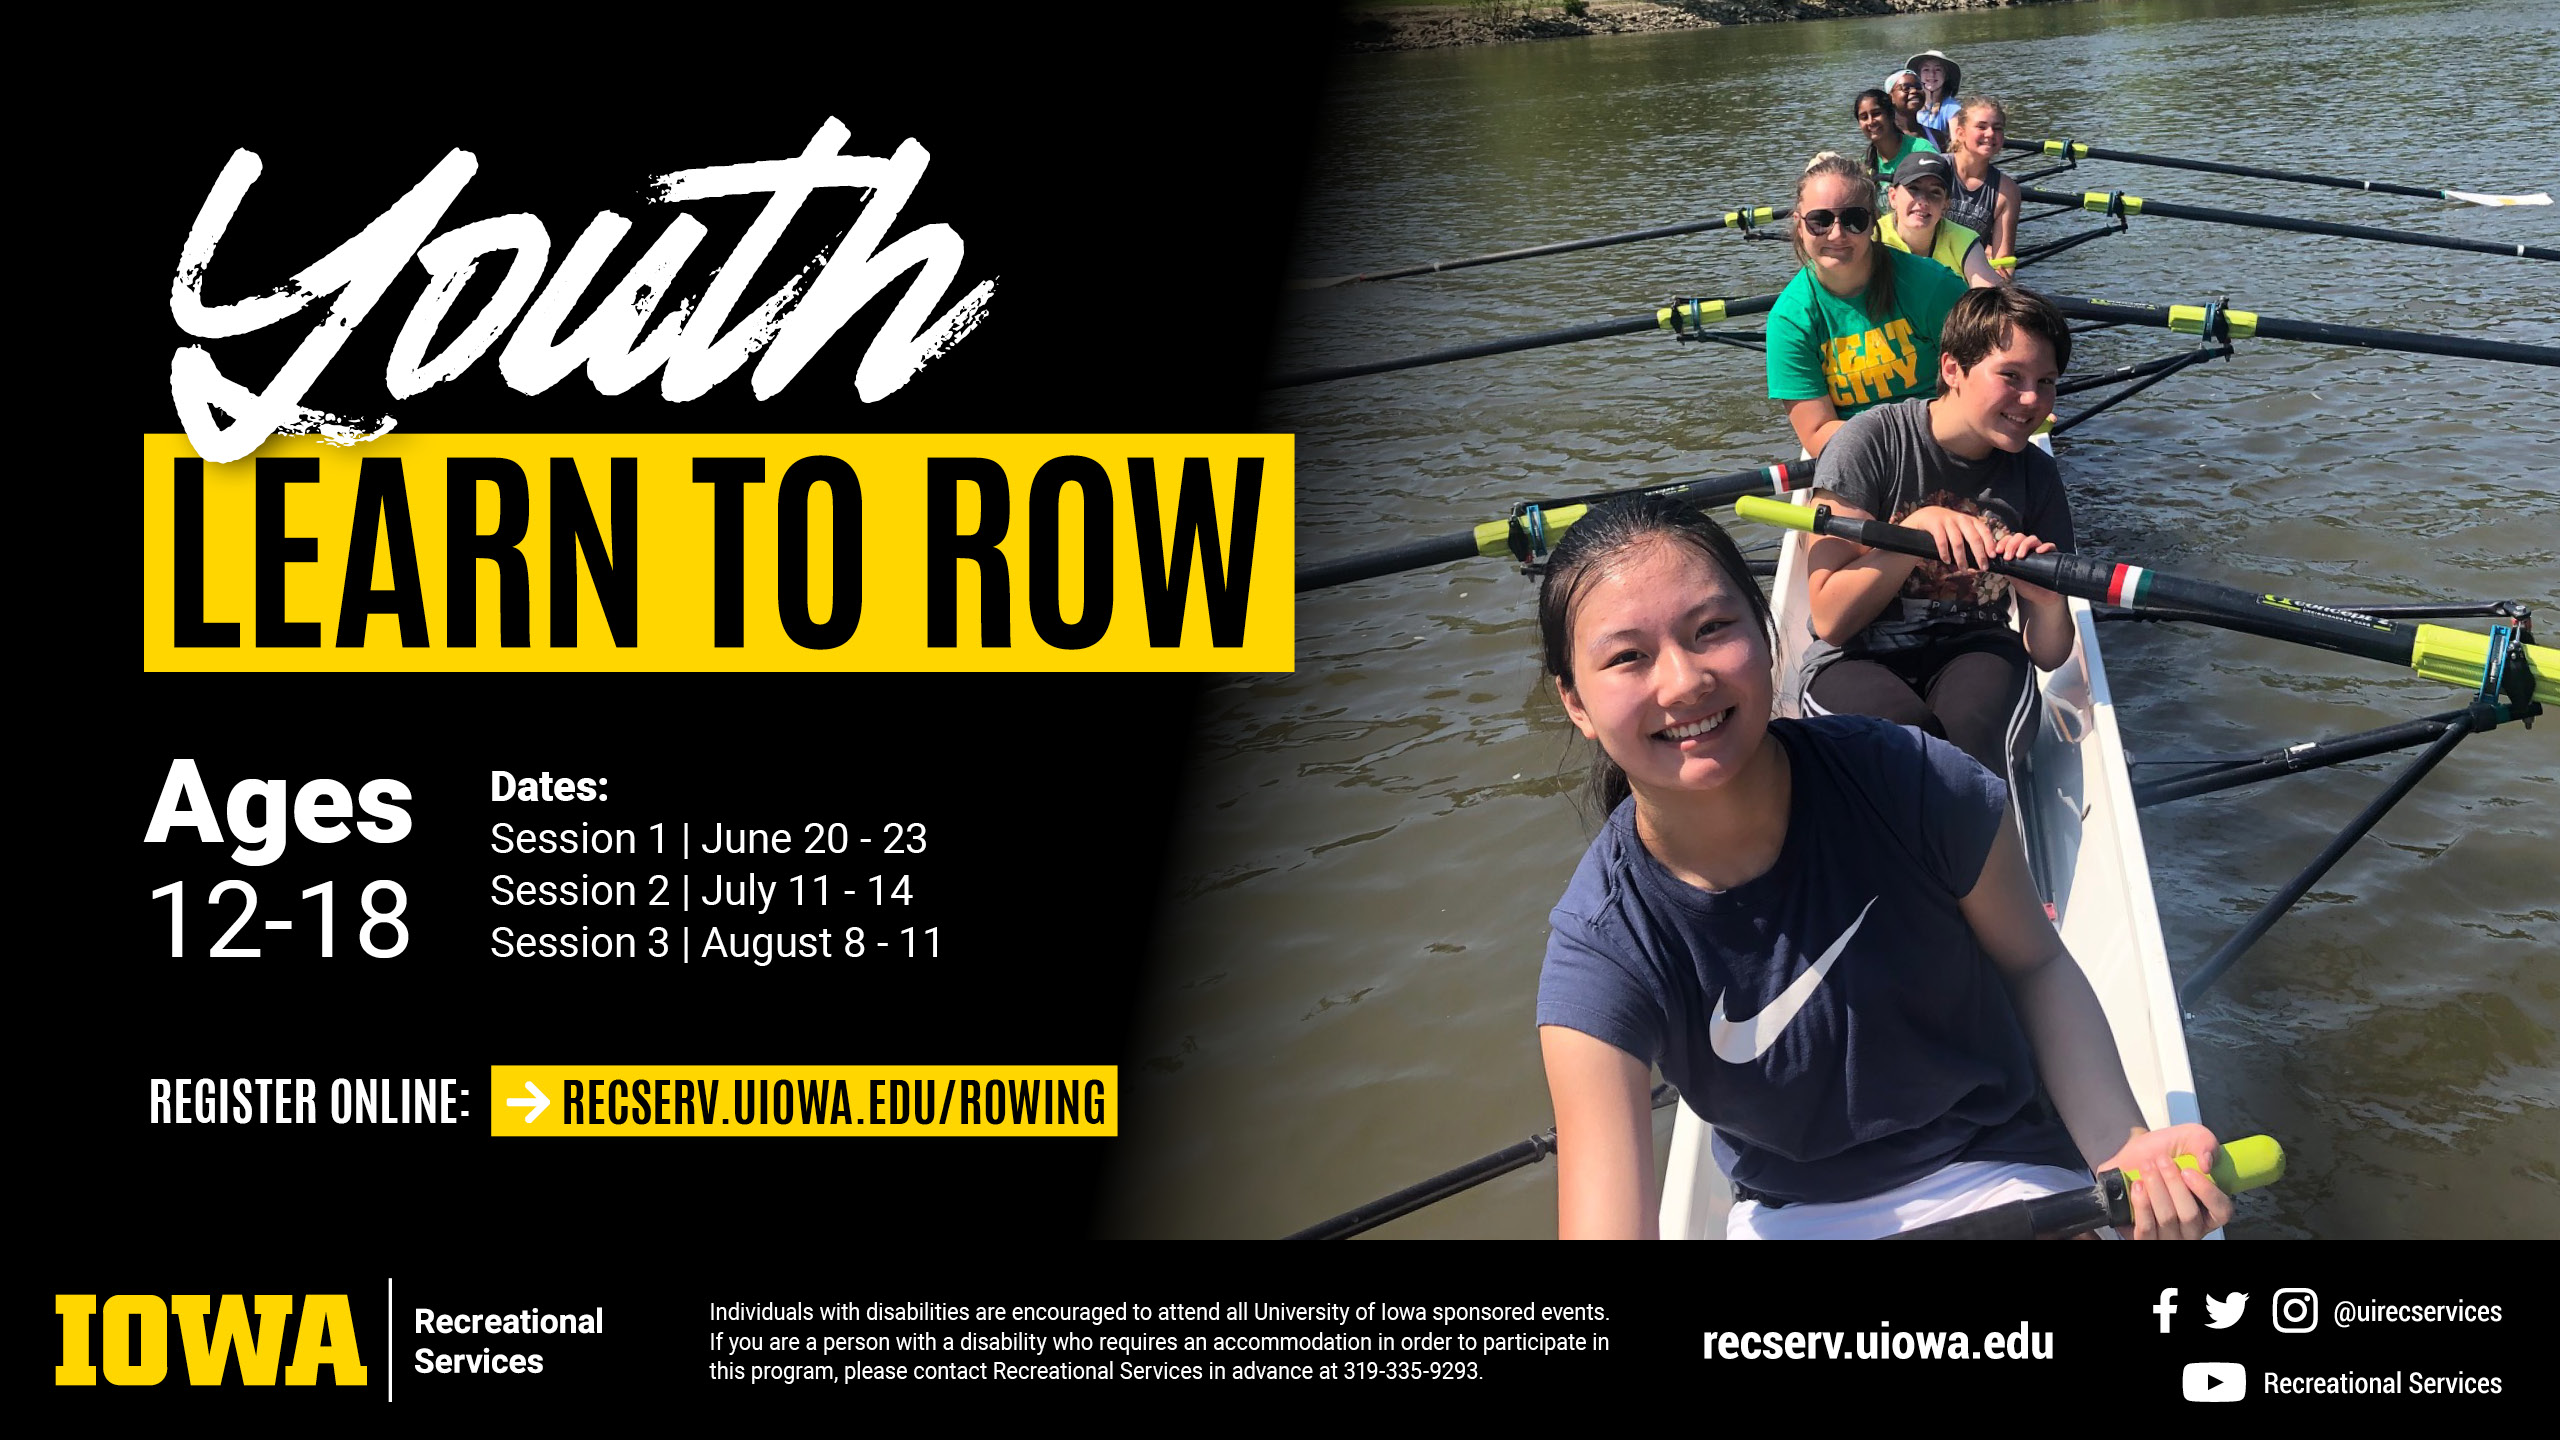 Youth Learn to Row Ages 12-18 Dates: Session 1 | Jun 20 -23; Session 2 | July 11 - 14; Session 3 | August 8 - 11. Register online: recserv.uiowa.edu/rowing